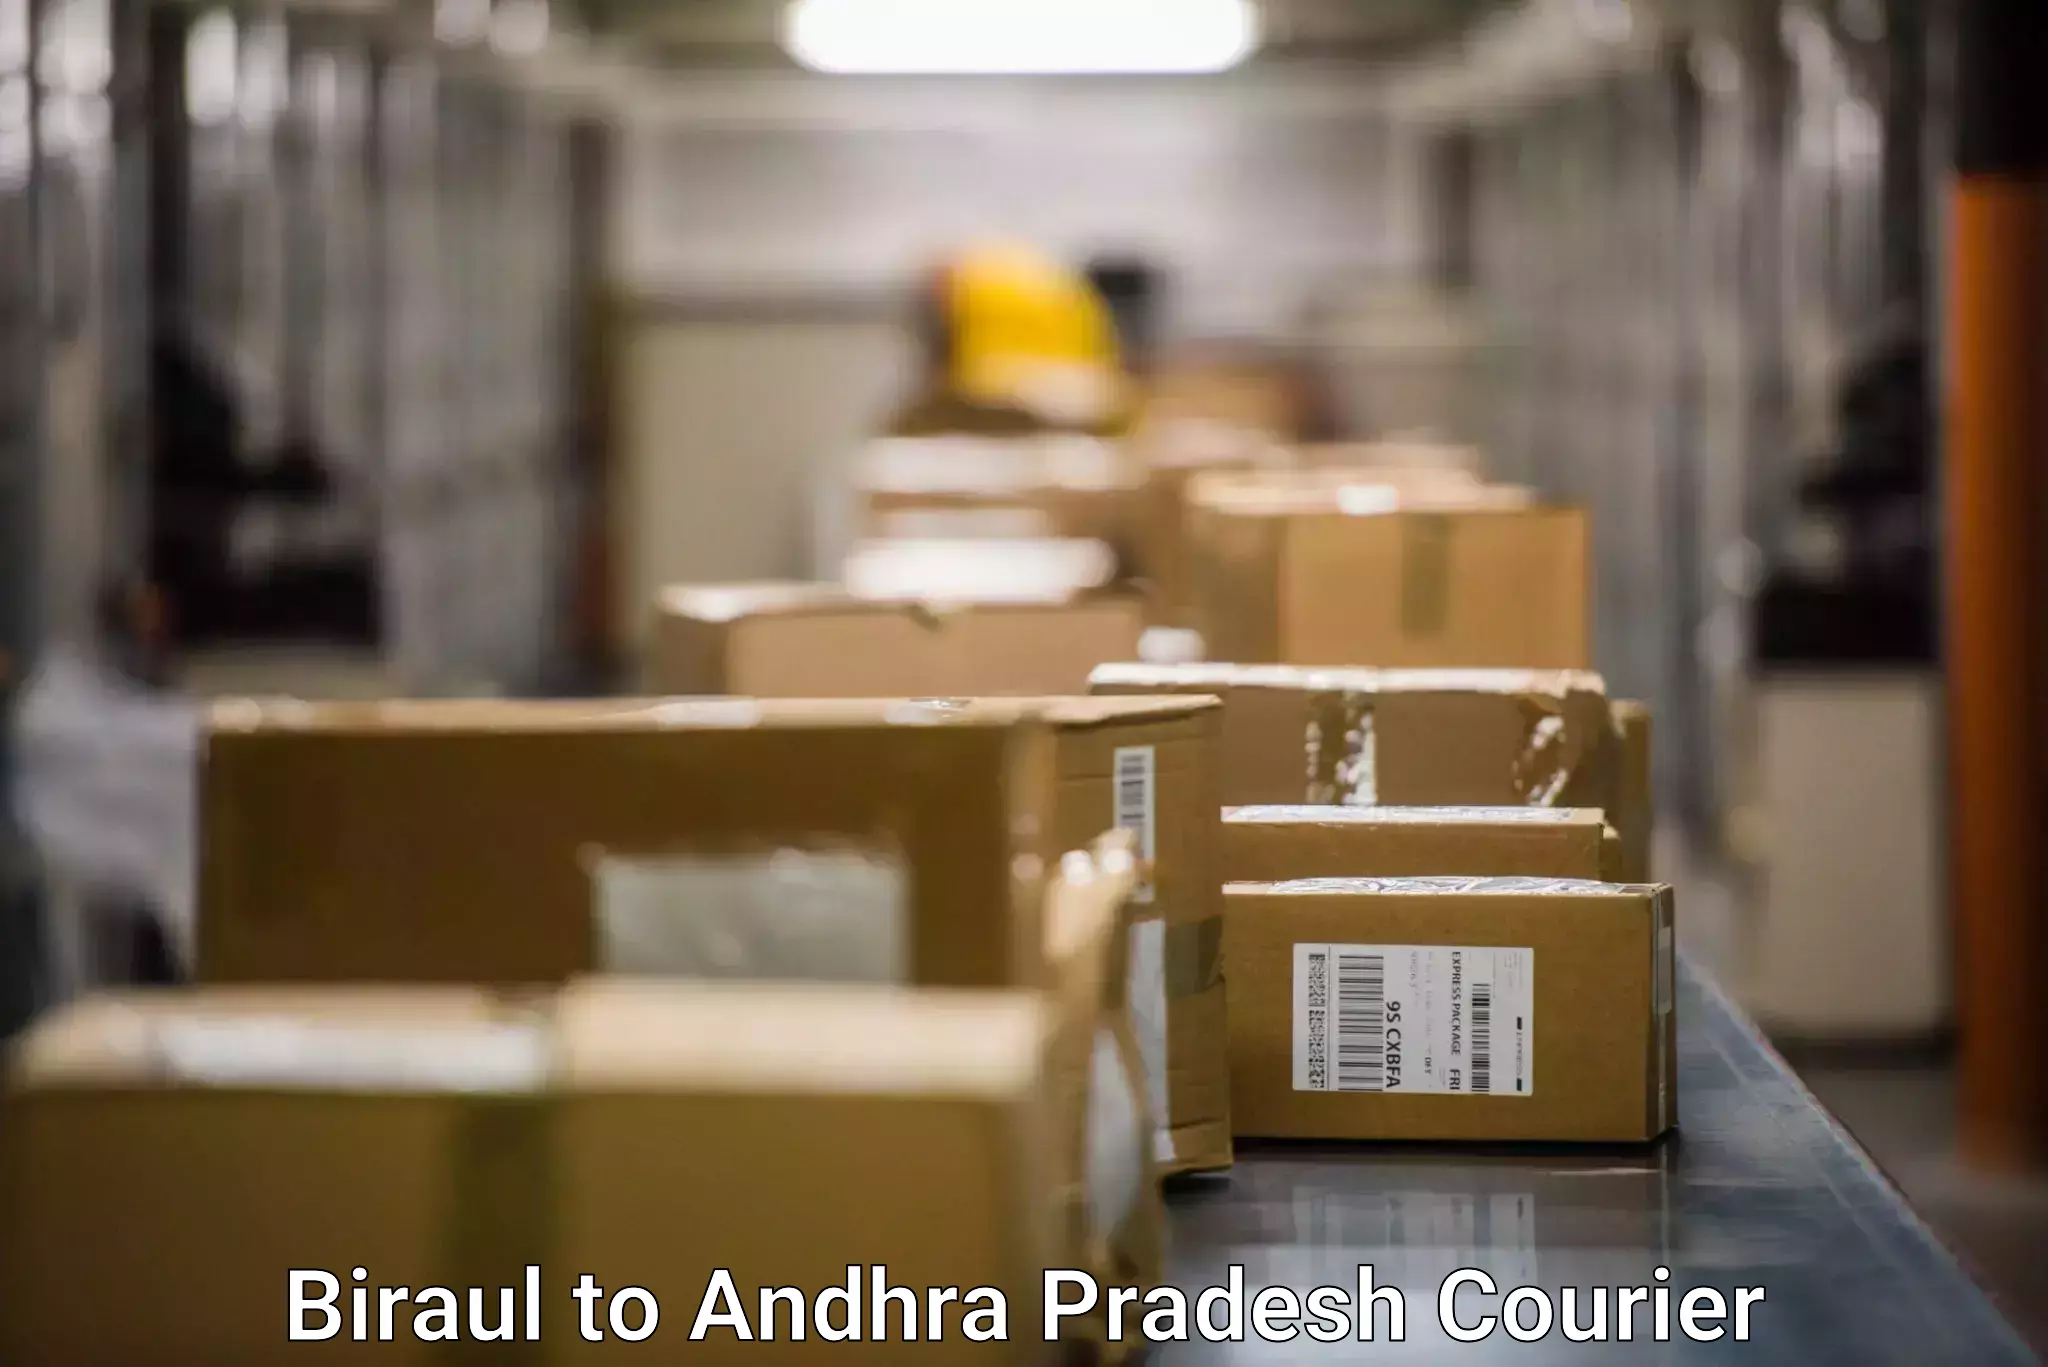 State-of-the-art courier technology Biraul to Andhra Pradesh